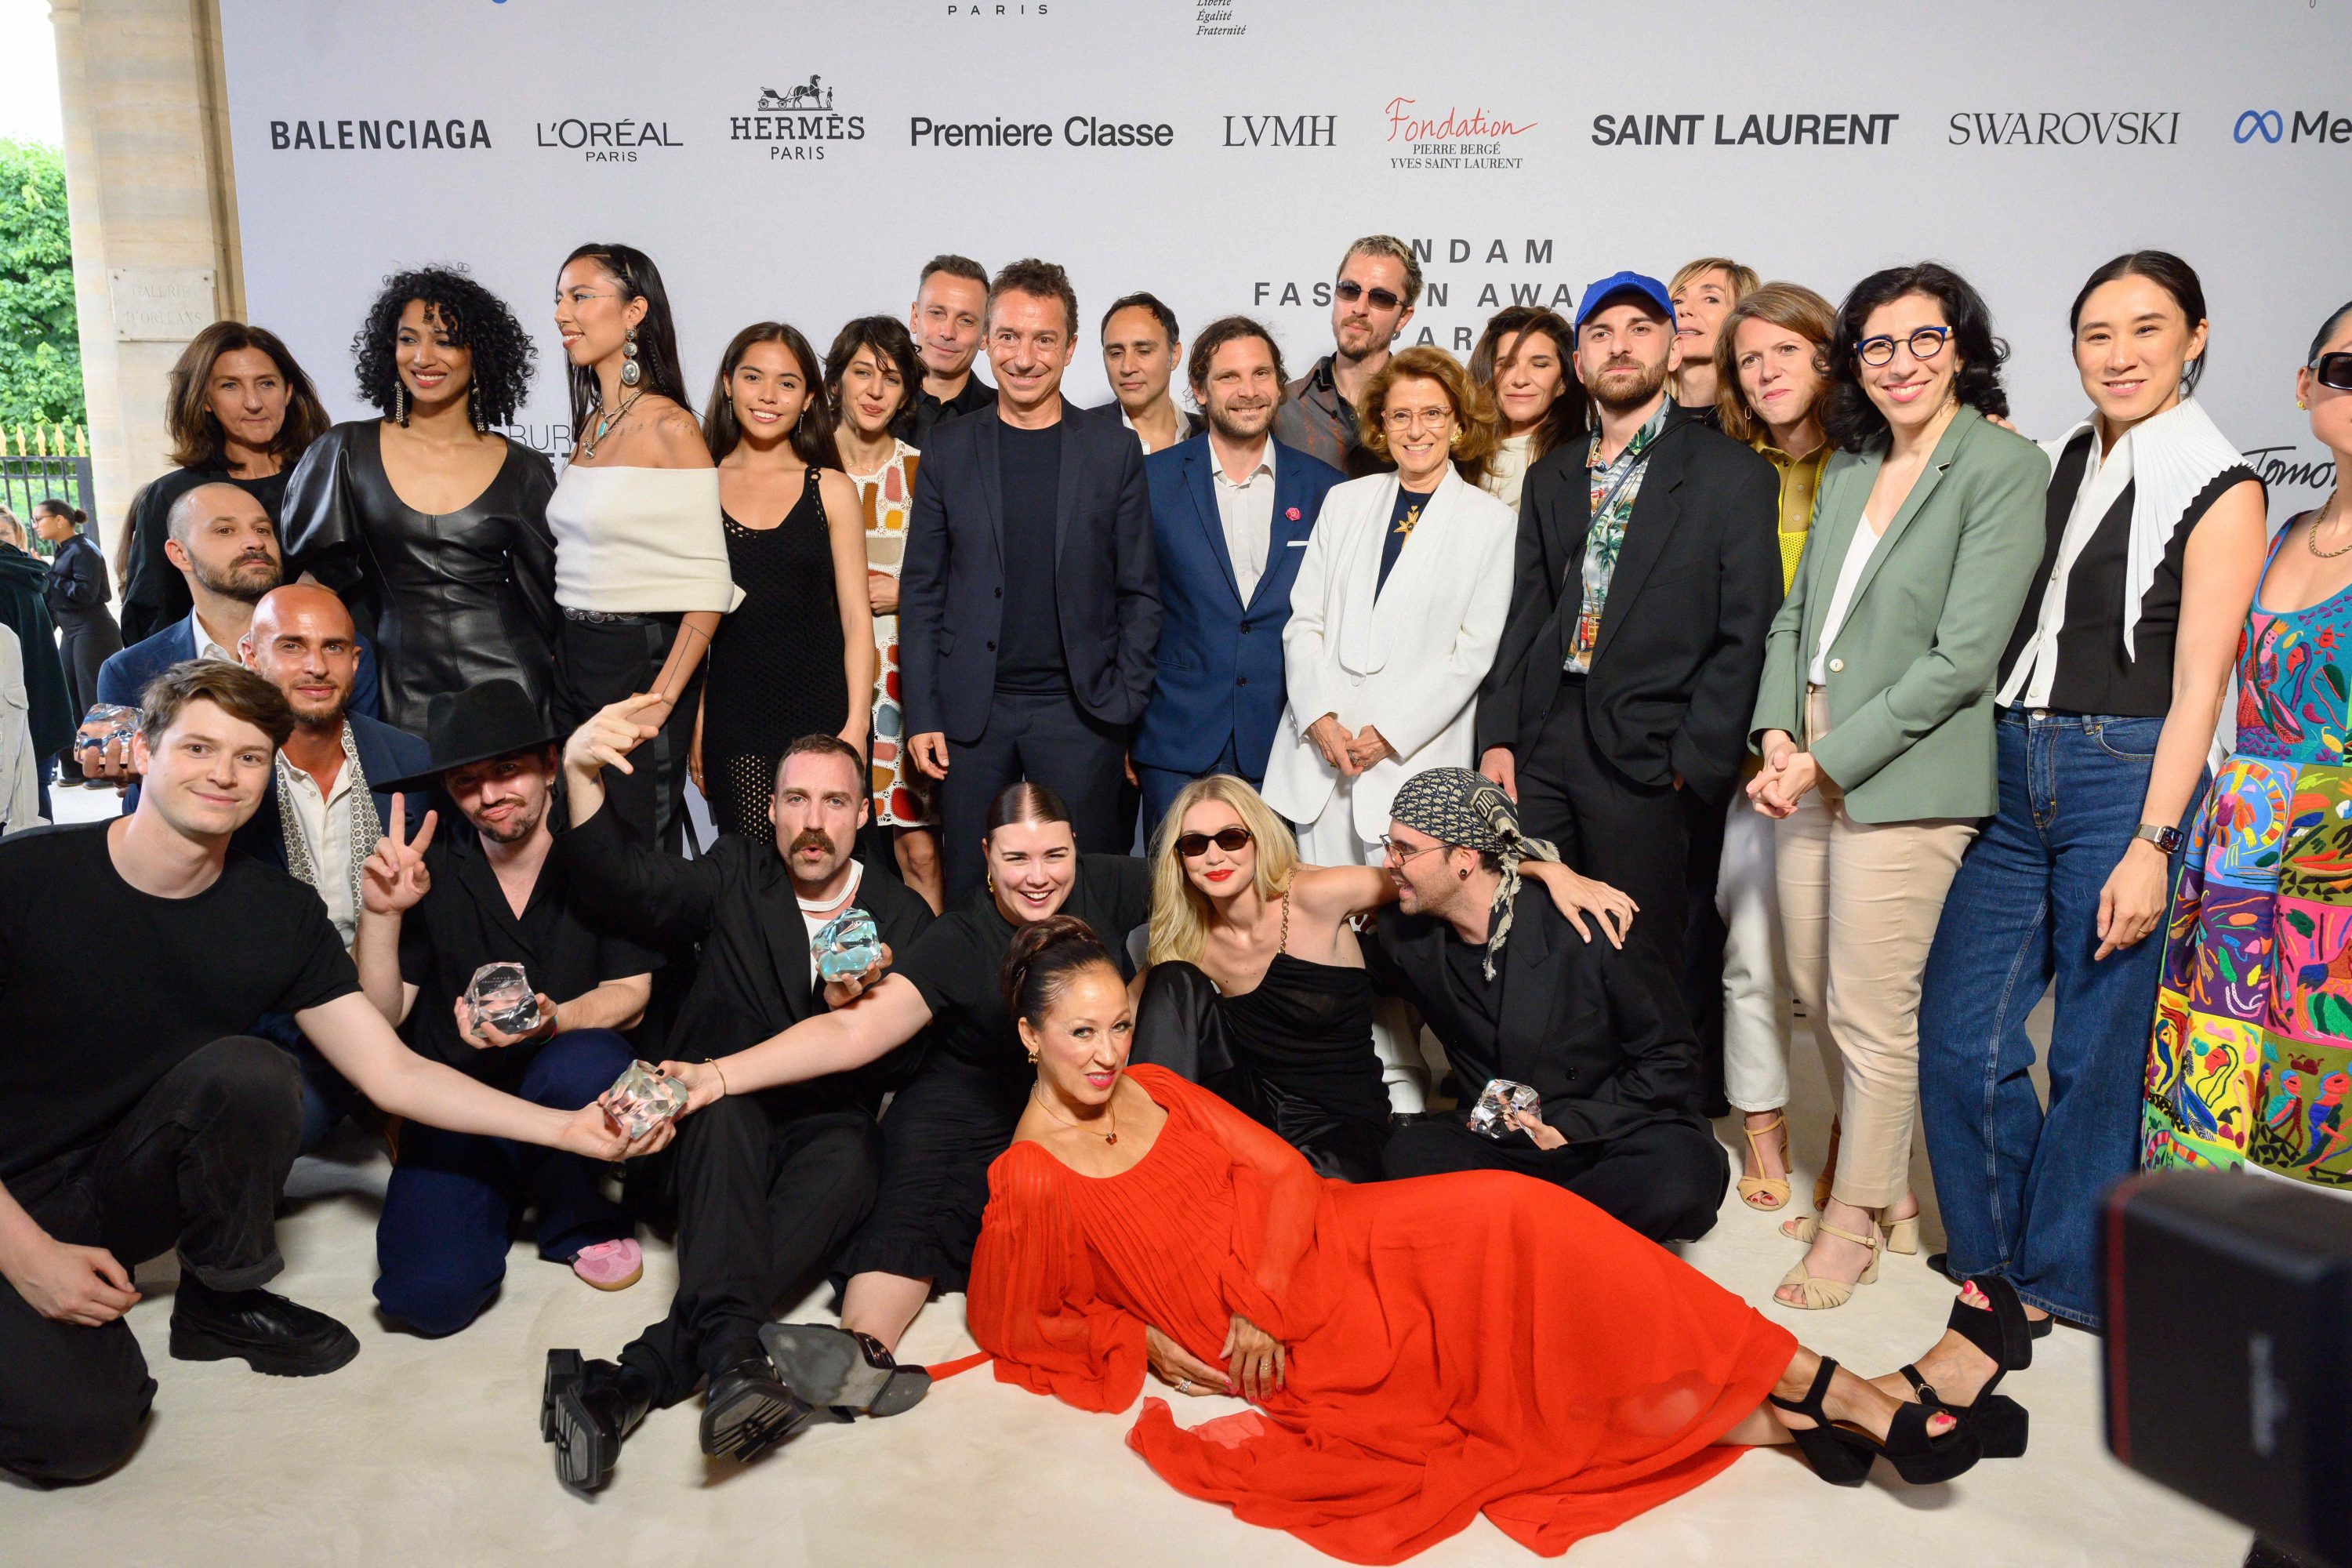 LVMH announces 2022 Innovation Award prize list, and its Grand